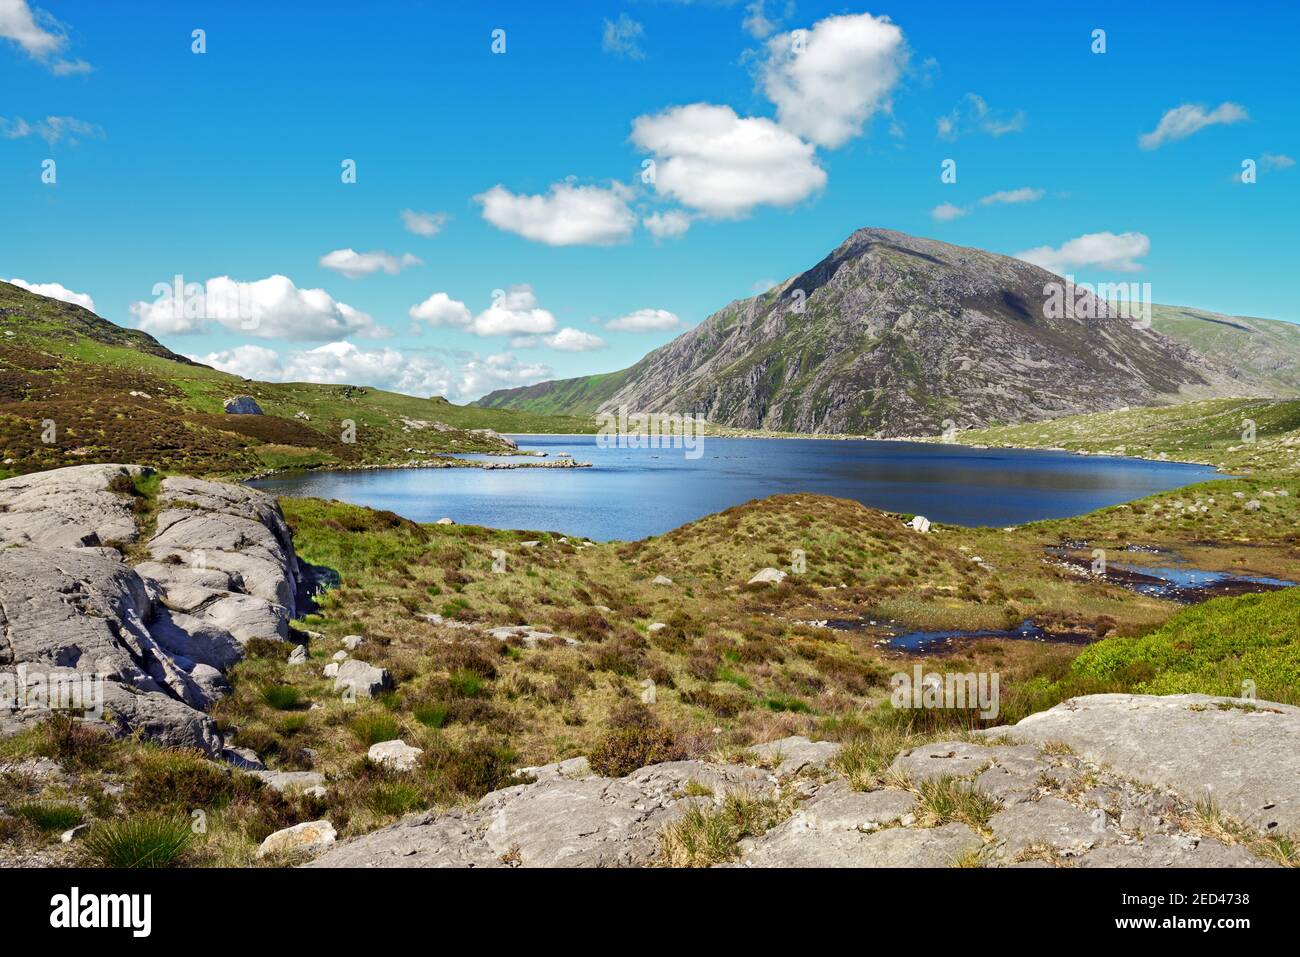 Llyn Idwal is a small mountain lake in the Glyderau mountain range in the Snowdonia National Park, Wales. Pen yr Ole Wen is in the background. Stock Photo